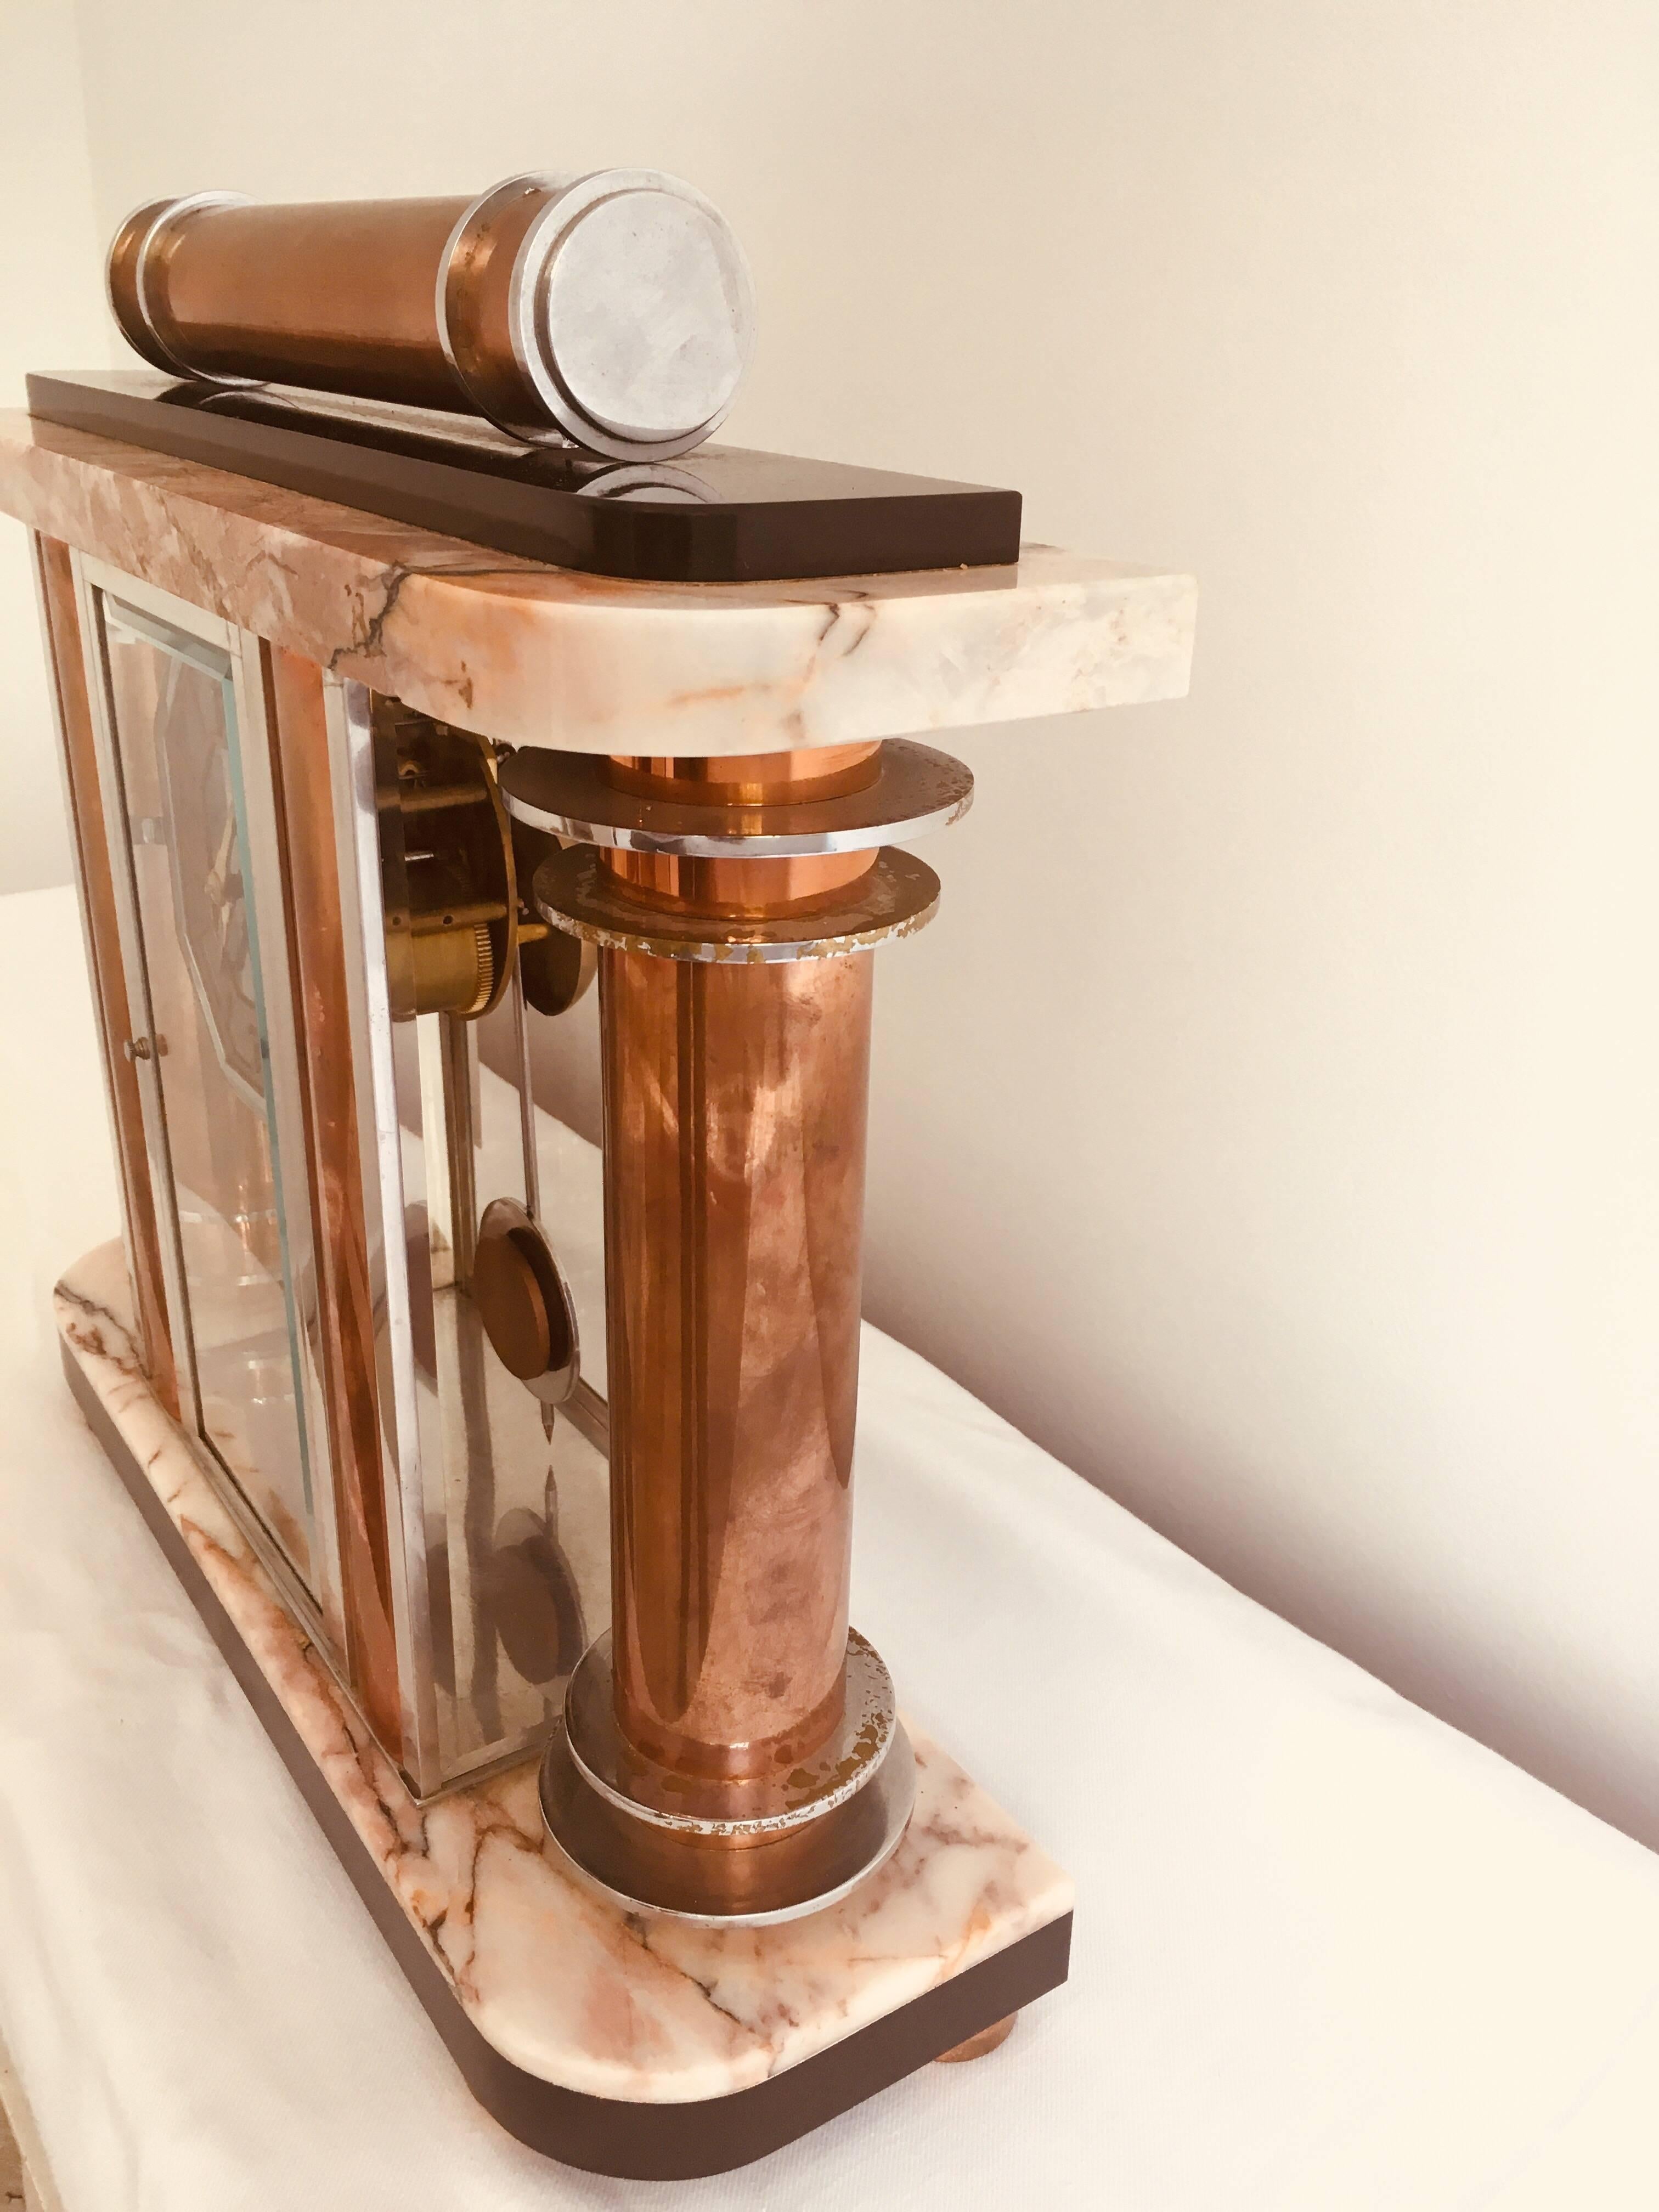 French Art Deco F. Martin marble mantel clock, 1930s. Nickel chrome and copper combine with butterscotch and black marble to the top and base, to make this an exceptional example by famed French clock maker F. Martin. It is in excellent working